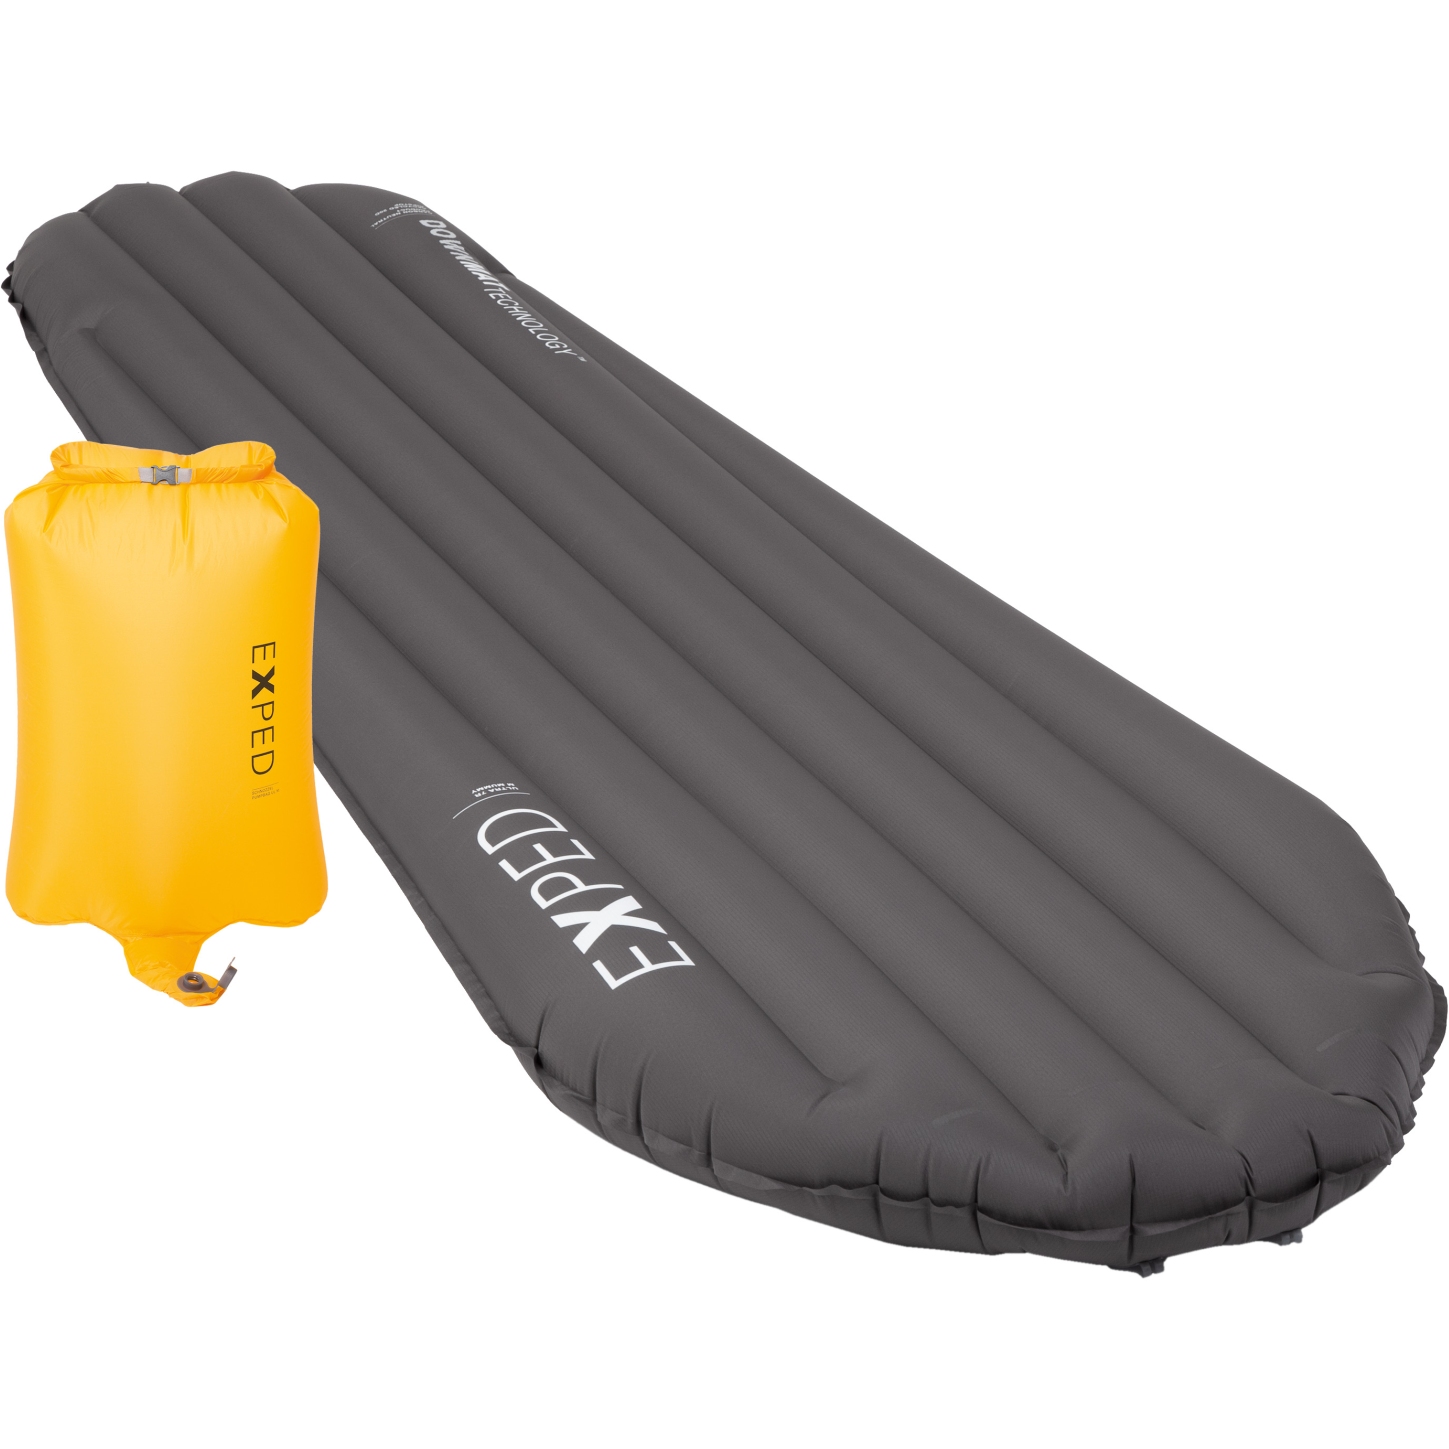 Picture of Exped Ultra 7R Mummy Sleeping Mat - M - greygoose